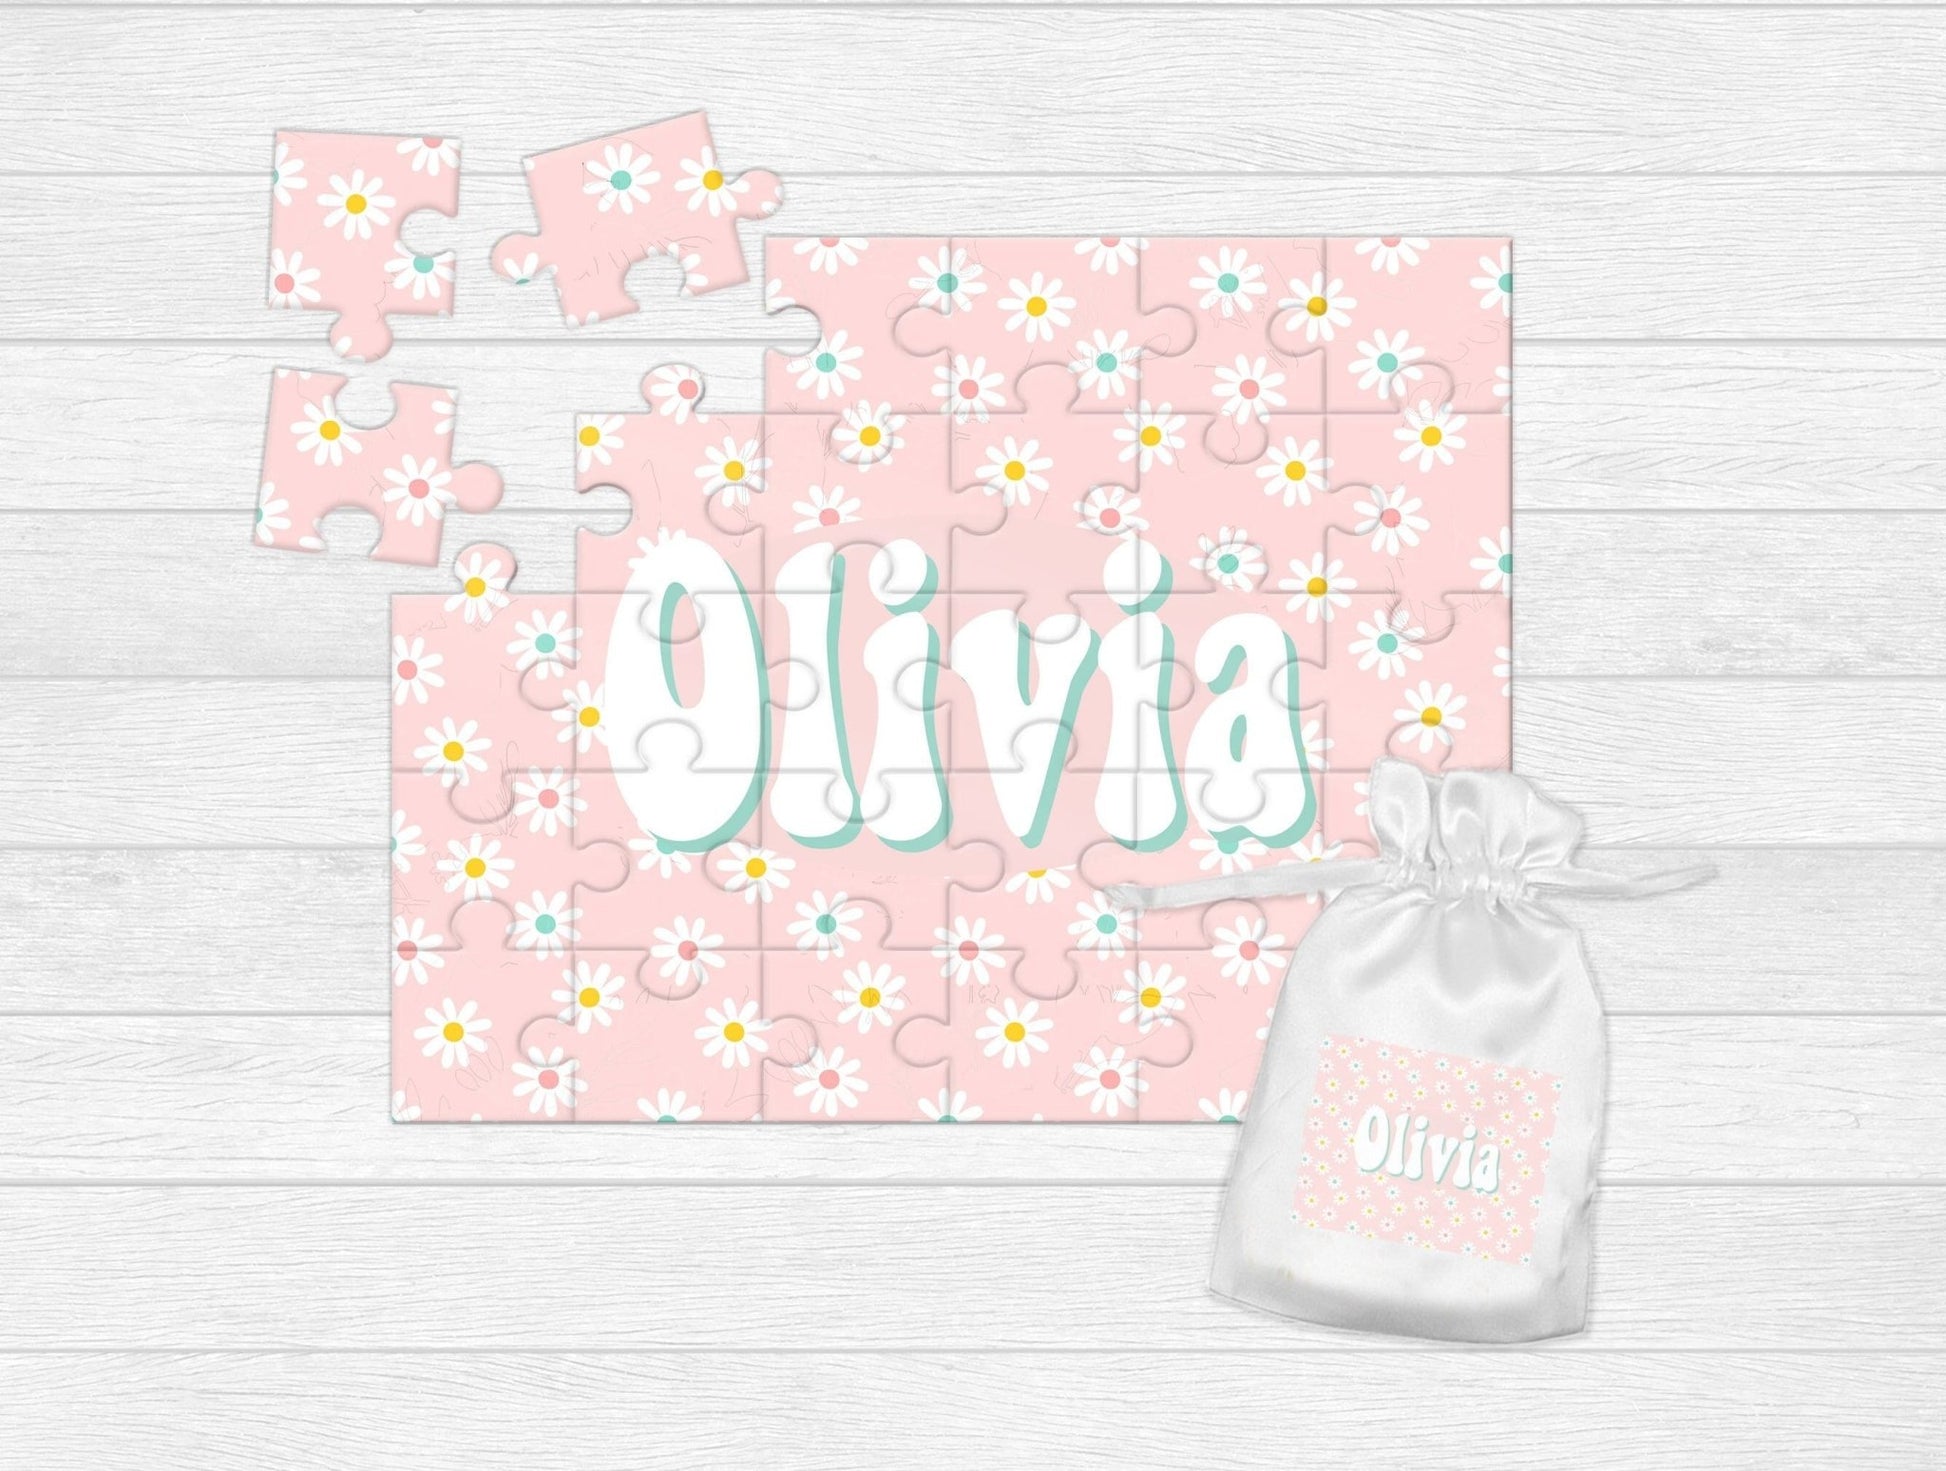 Groovy Daisy Print Girls Name Puzzle Easter Basket Stuffer For Girls - Squishy Cheeks